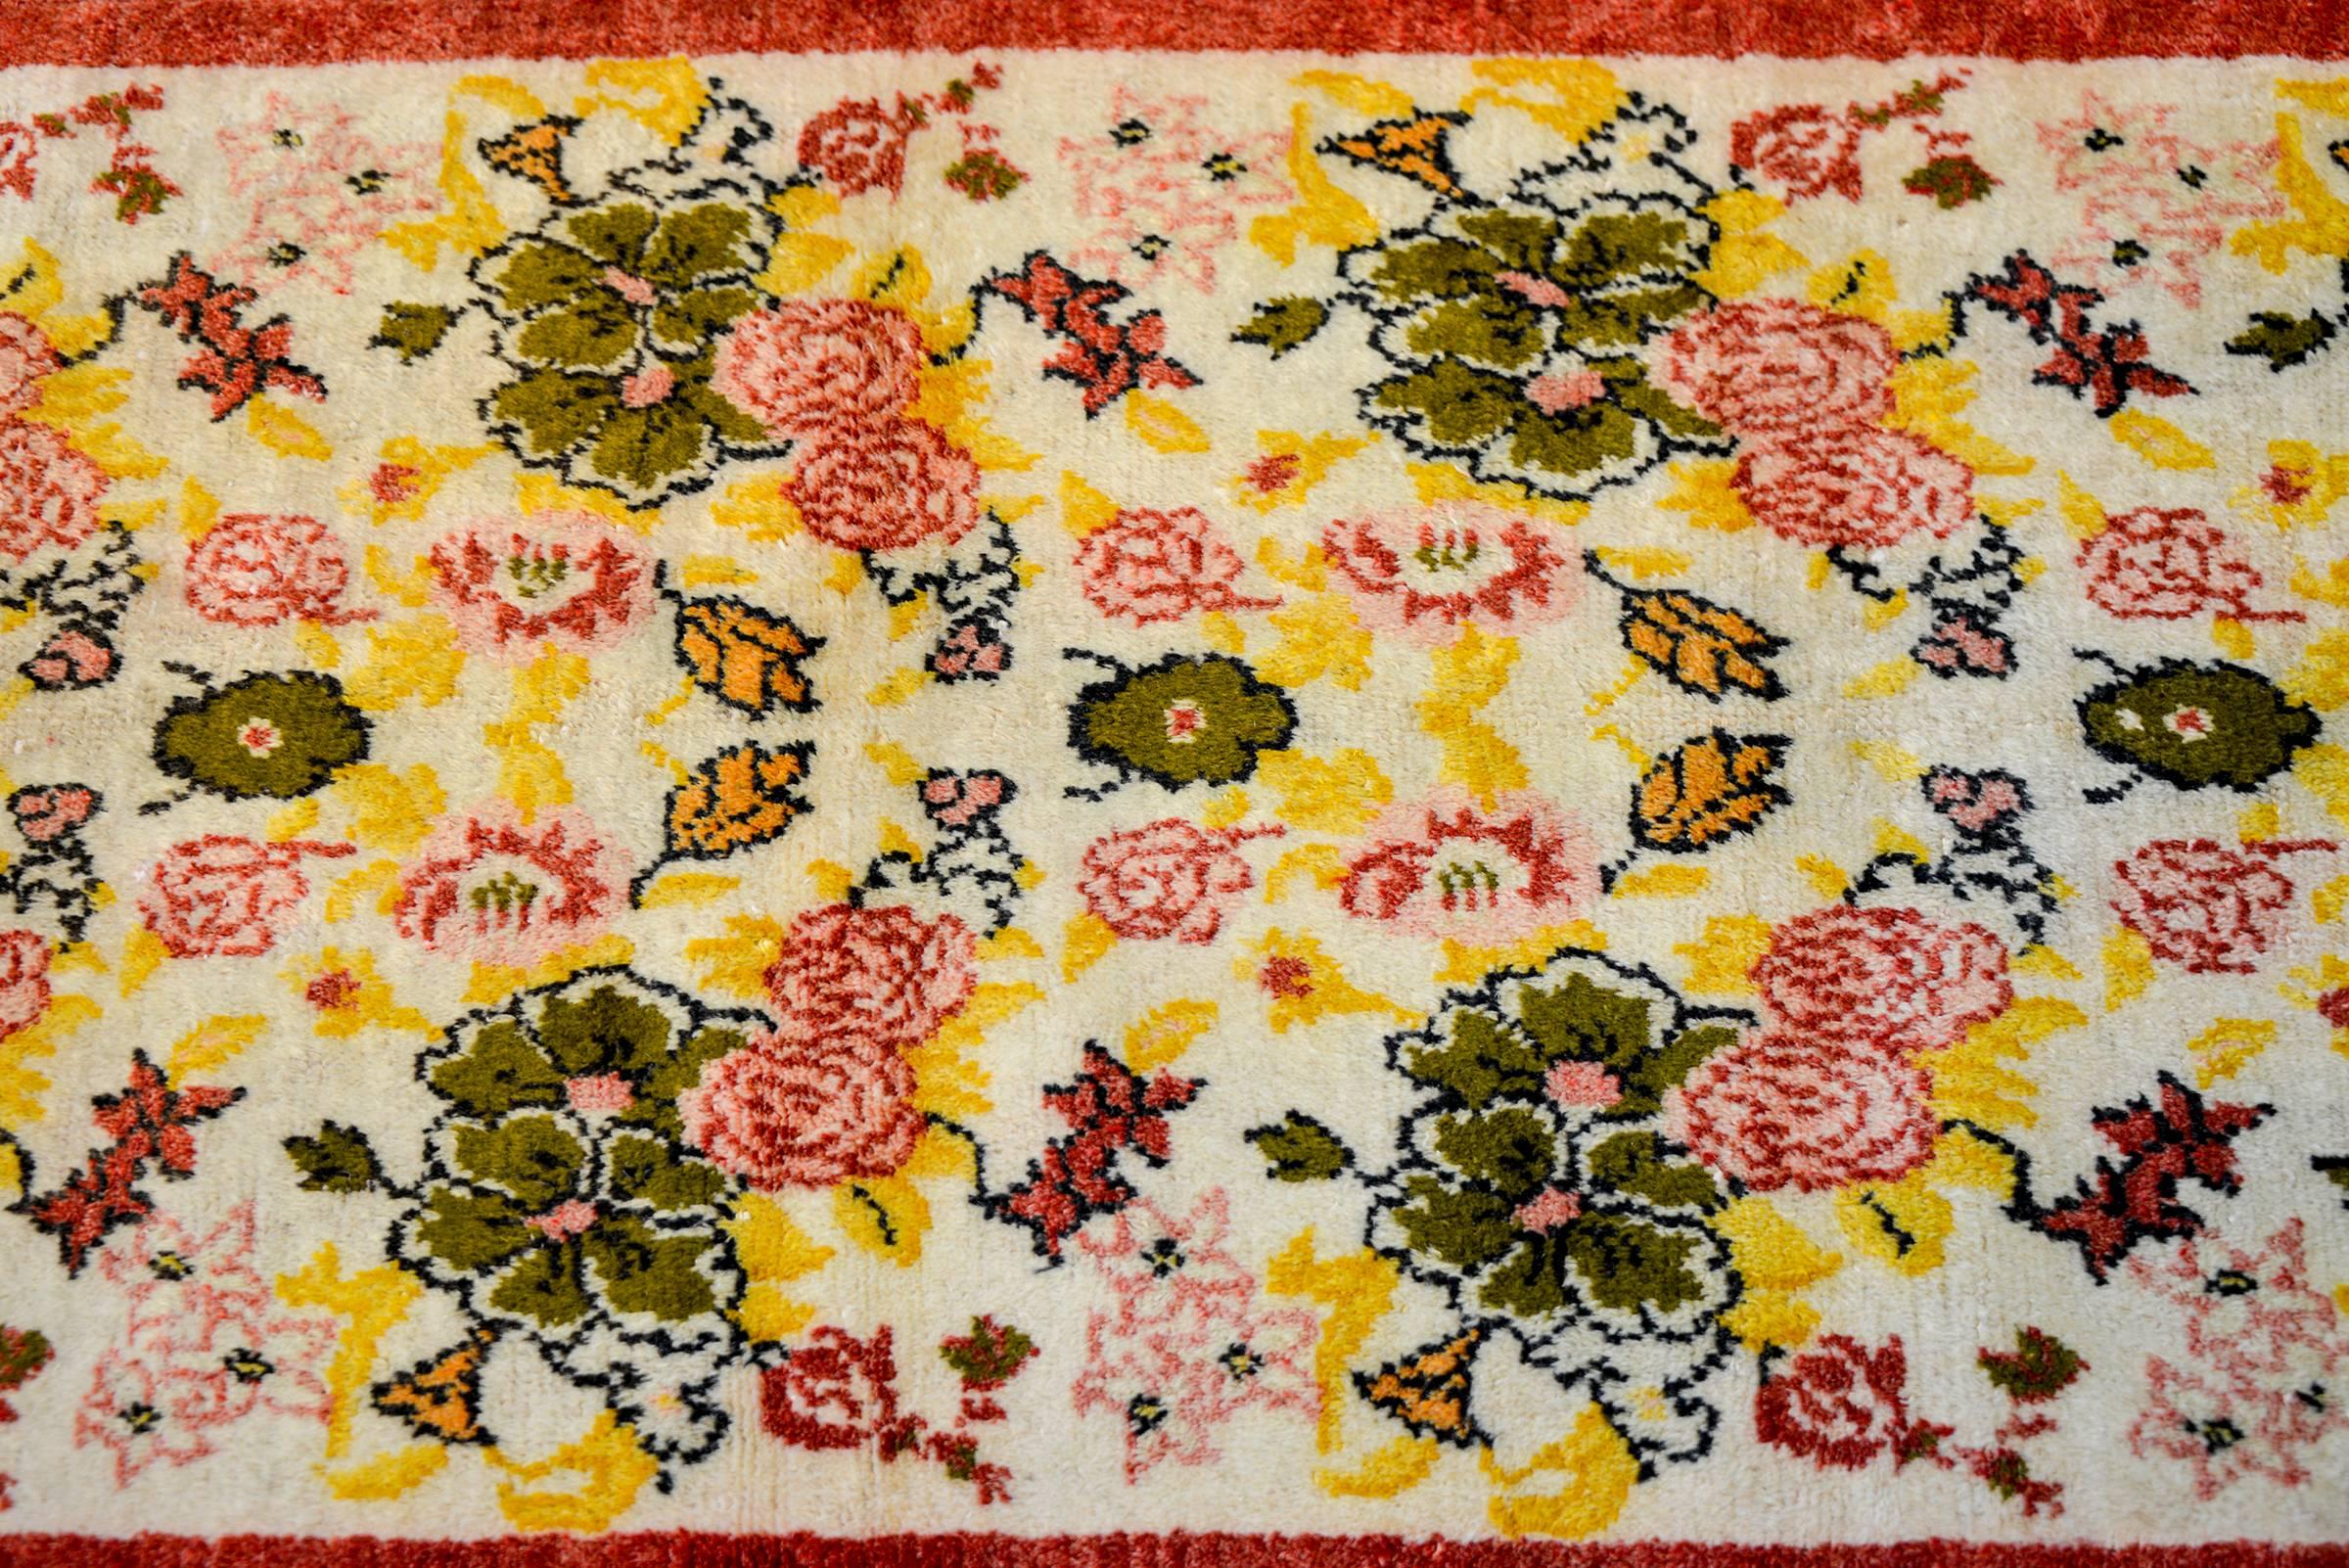 A unique early 20th century Turkish rug with a repeated pattern of large green and small rose colored flowers, with gold and orange leaves, on a white background. The border is simple with a cranberry band.